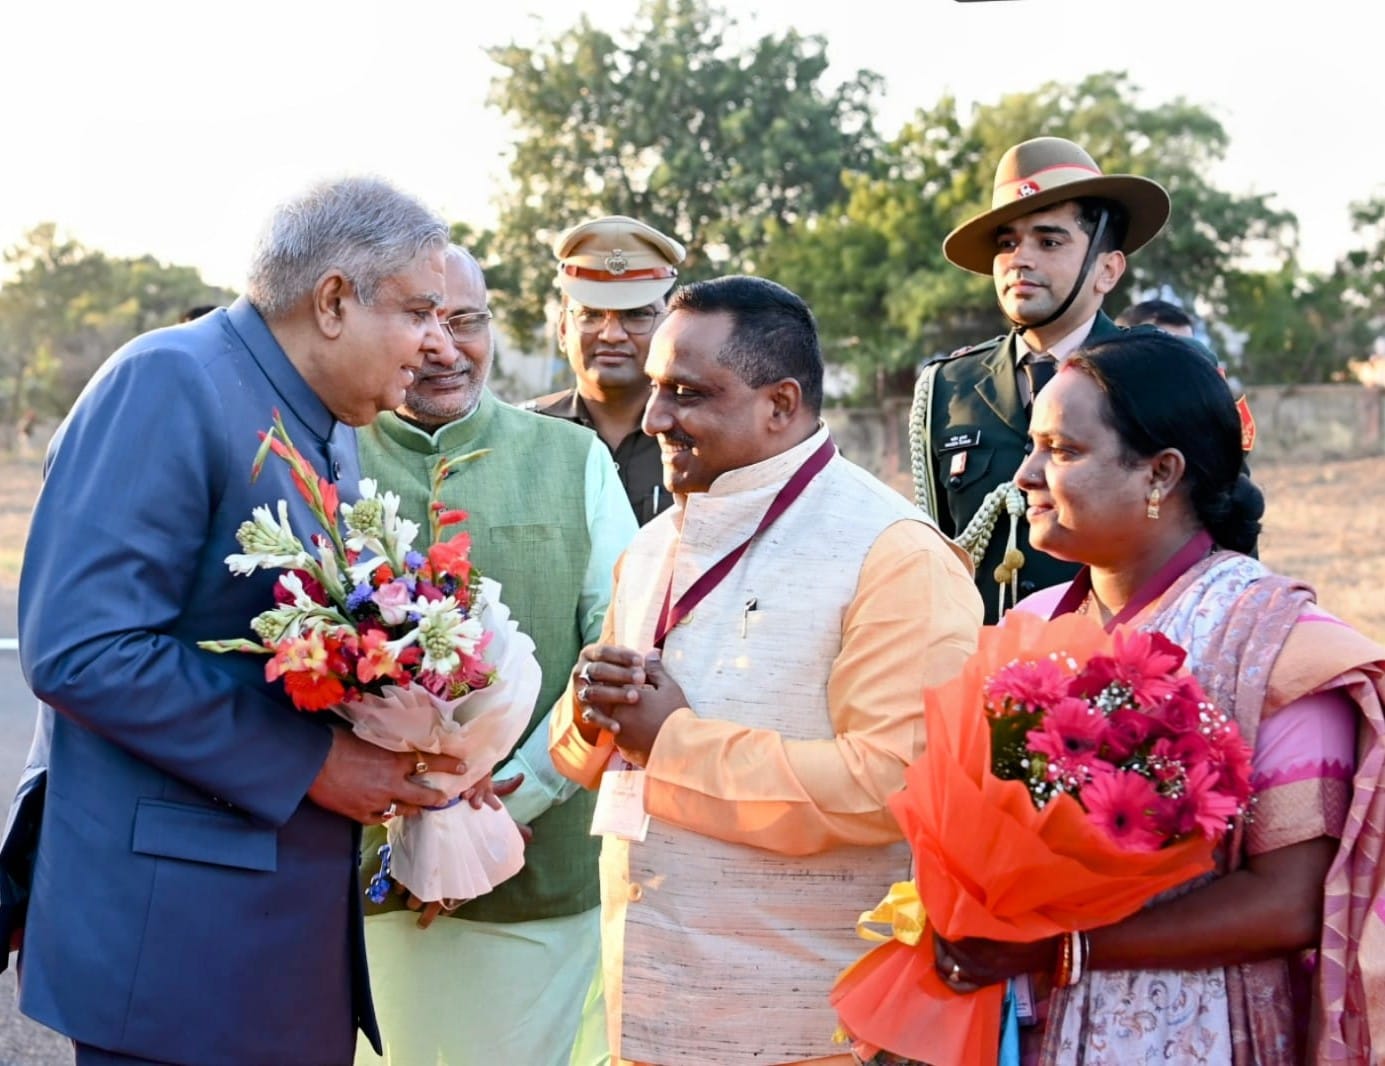 The Vice-President, Shri Jagdeep Dhankhar being welcomed by Shri C.P. Radhakrishnan, Governor of Jharkhand, Shri Banna Gupta, Minister, Government of Jharkhand and other dignitaries on his arrival at Dhanbad in Jharkhand on December 10, 2023.